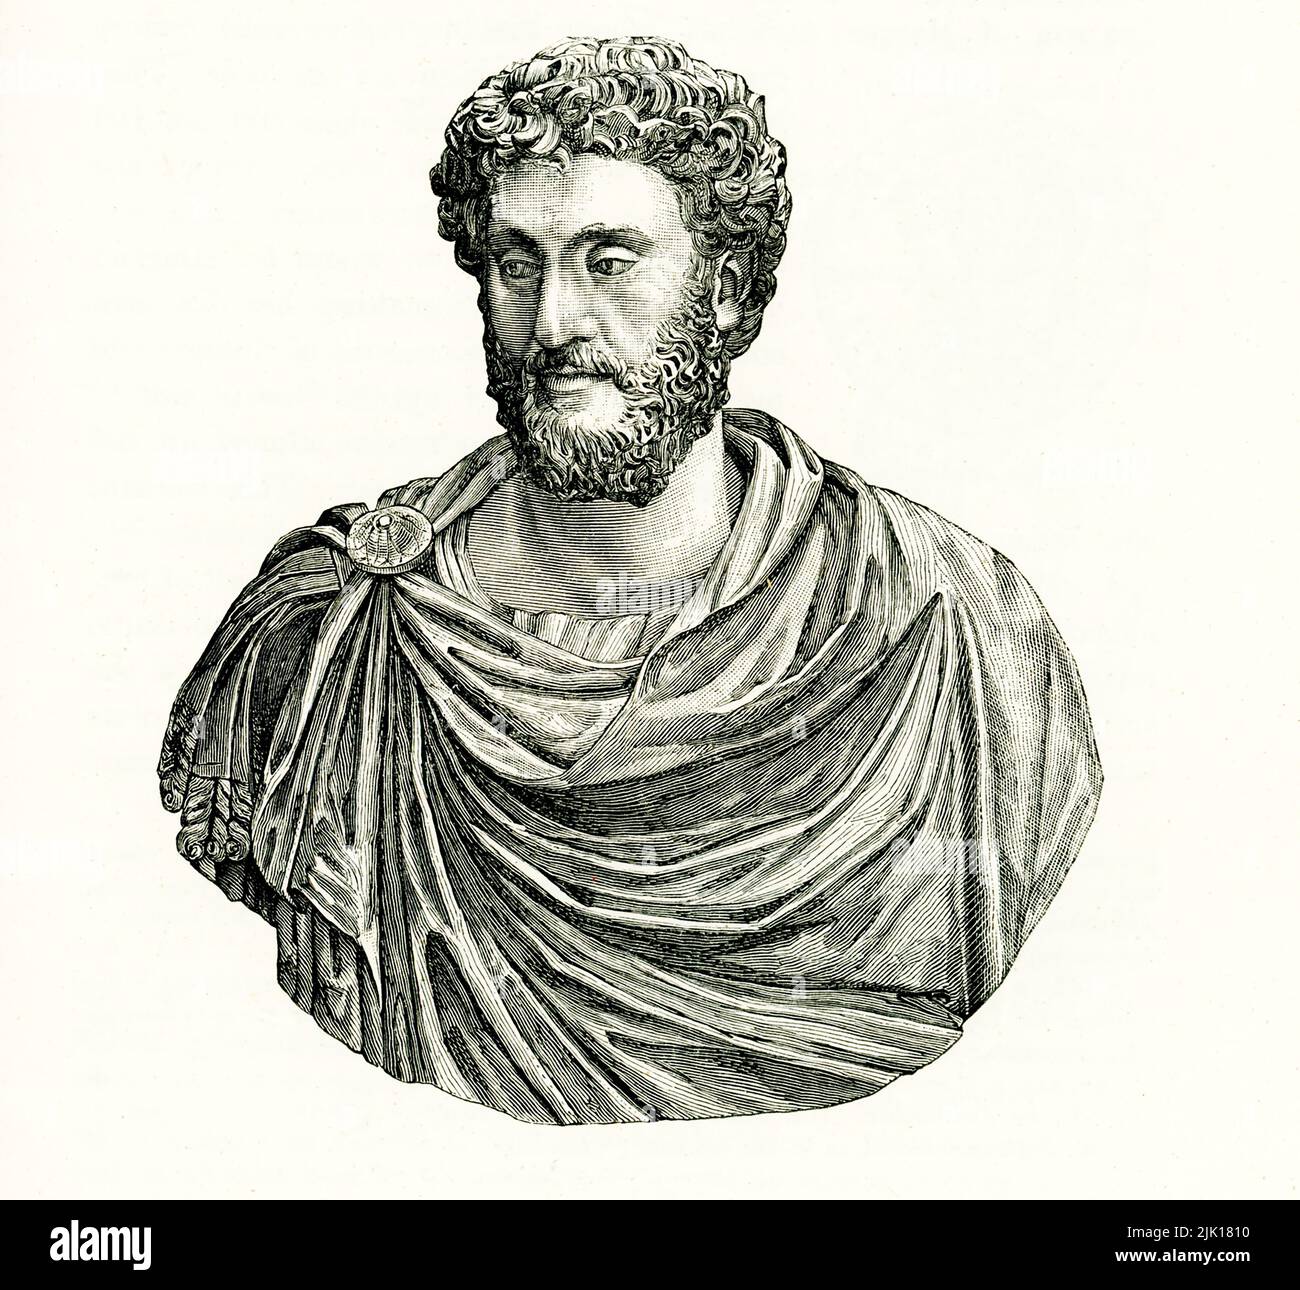 The 1884 caption reads: 'Commodus - marble bust found at Ostia- in Vatican.' Commodus was the Roman emperor Marcus Aurelius' only surviving son and was hand-picked to succeed his father as emperor. When Commodus was 15, his father named him as co-emperor, and at 17 Commodus joined his father at the frontier encampments where Marcus Aurelius was leading Roman troops to battle. Commodus was crowned emperor at 19, when Marcus Aurelius died. Commodus ruled til he was assassinated in 192. Stock Photo